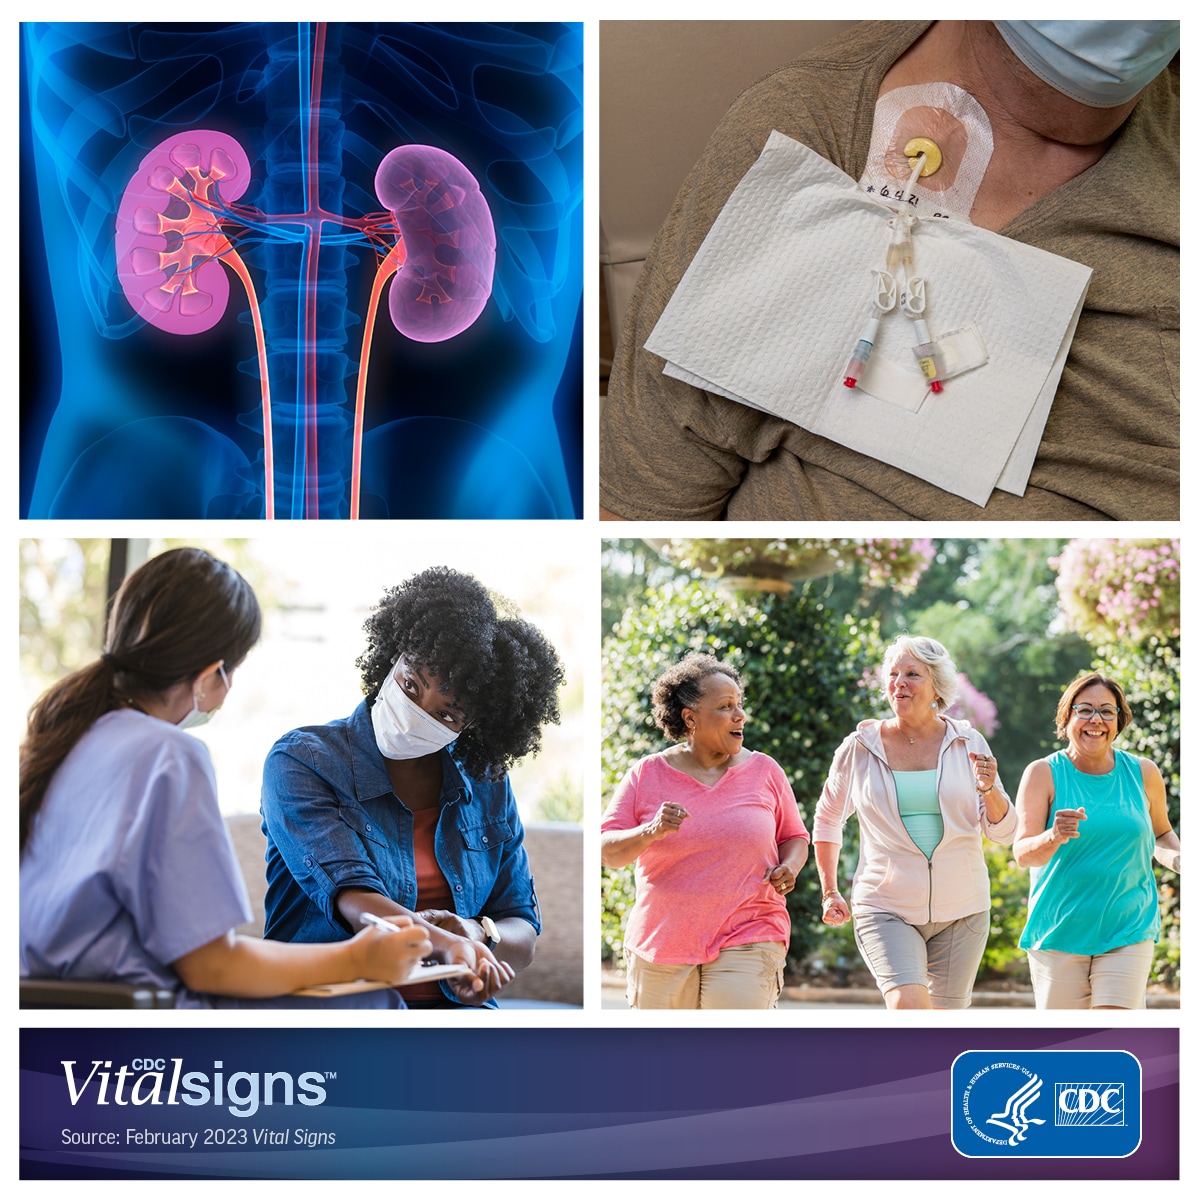 Photo collage of kidneys, patient set up for dialysis, nurse asking a patient questions, and a trio of women jogging.